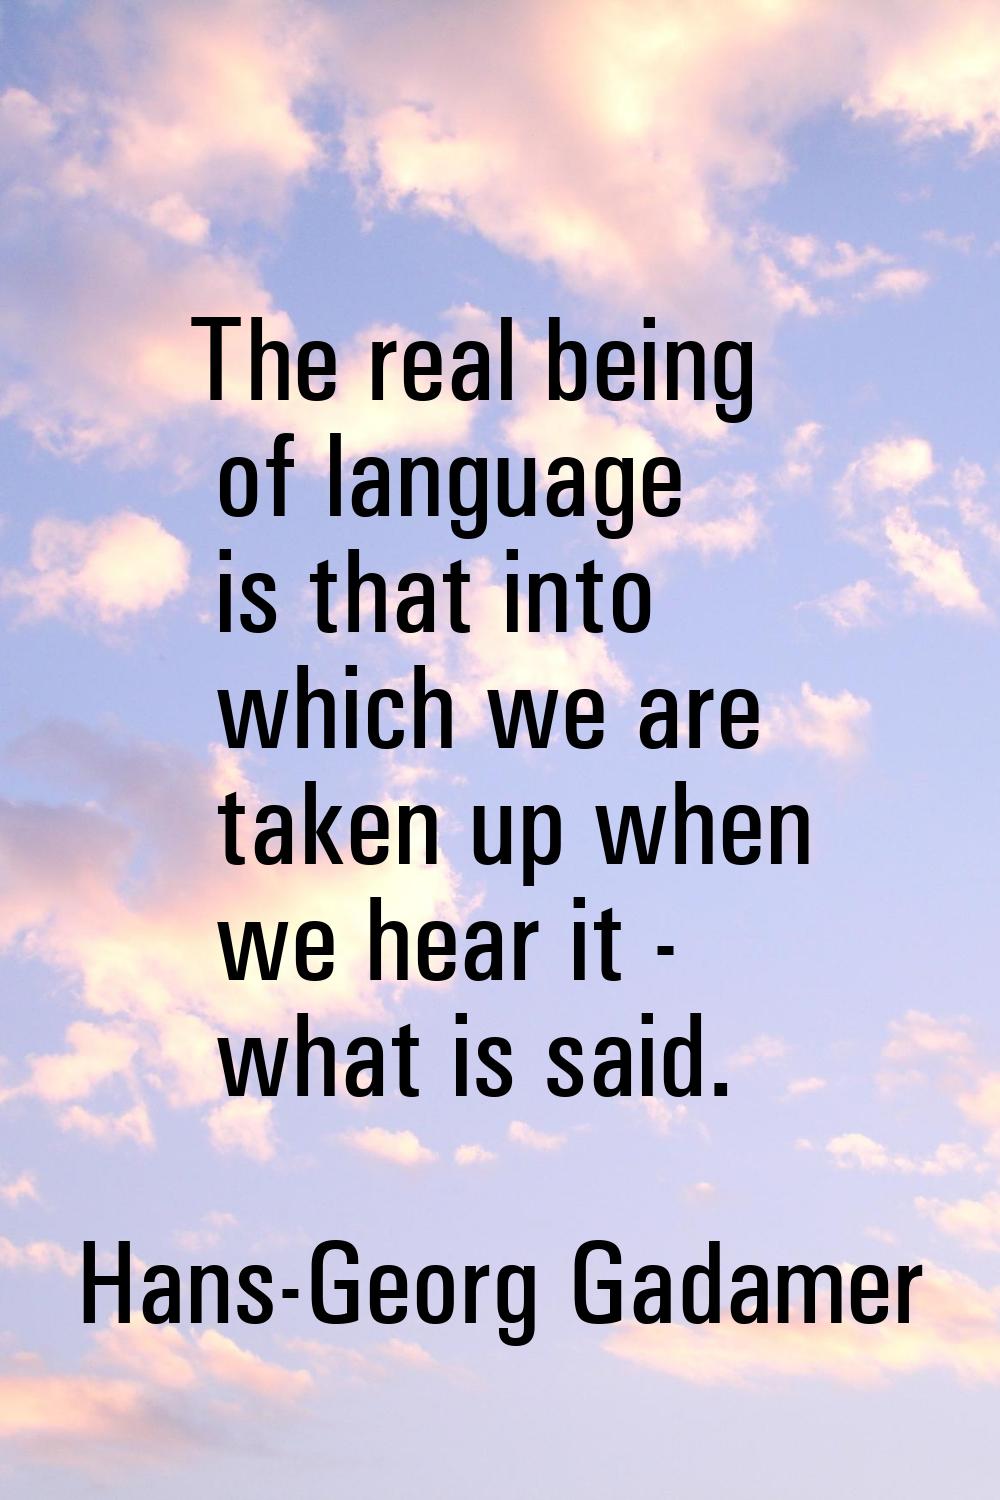 The real being of language is that into which we are taken up when we hear it - what is said.